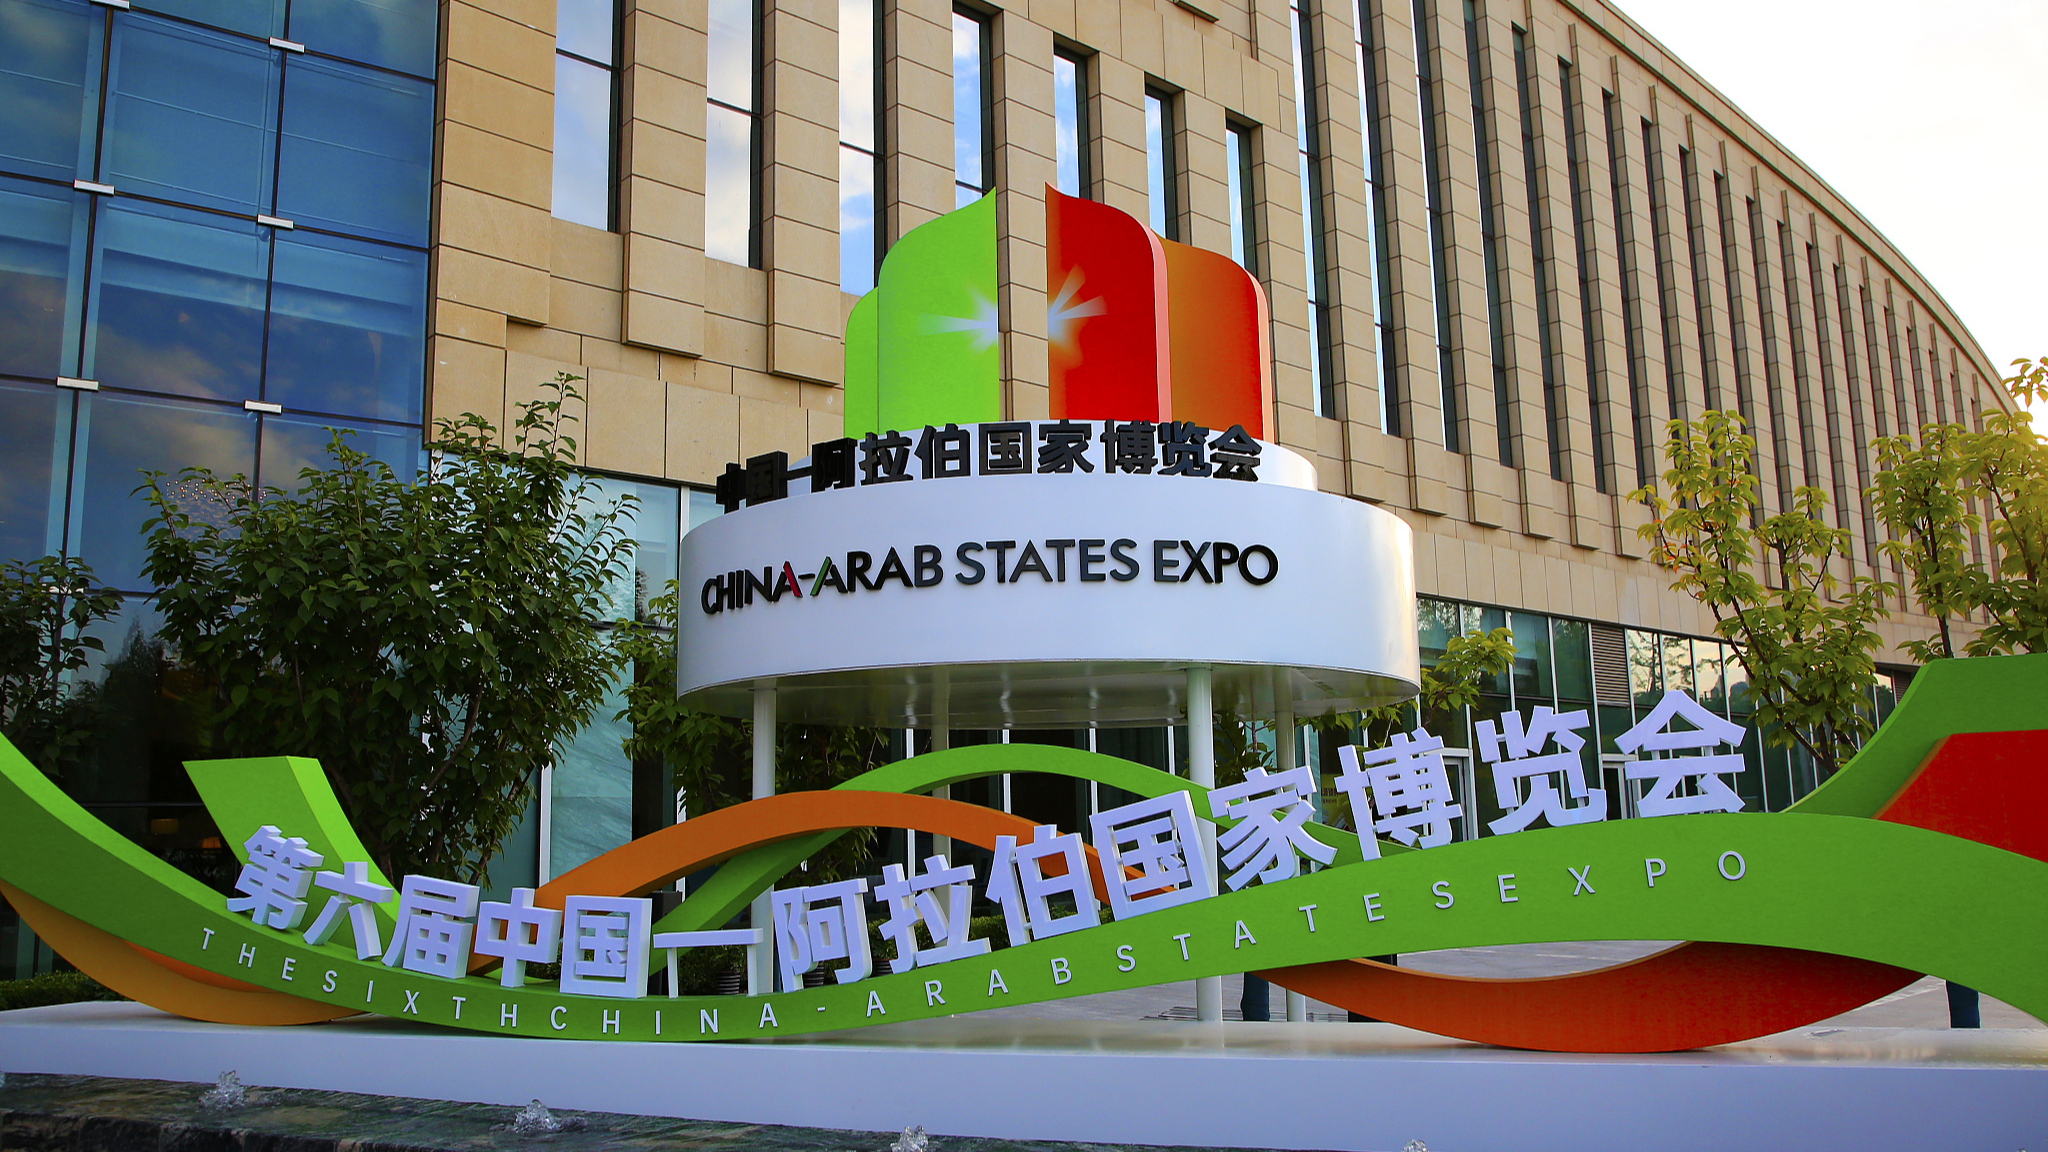 An installation showing the sixth China-Arab States Expo is seen in Yinchuan, northwest China's Ningxia Hui Autonomous Region, September 20, 2023. /CFP